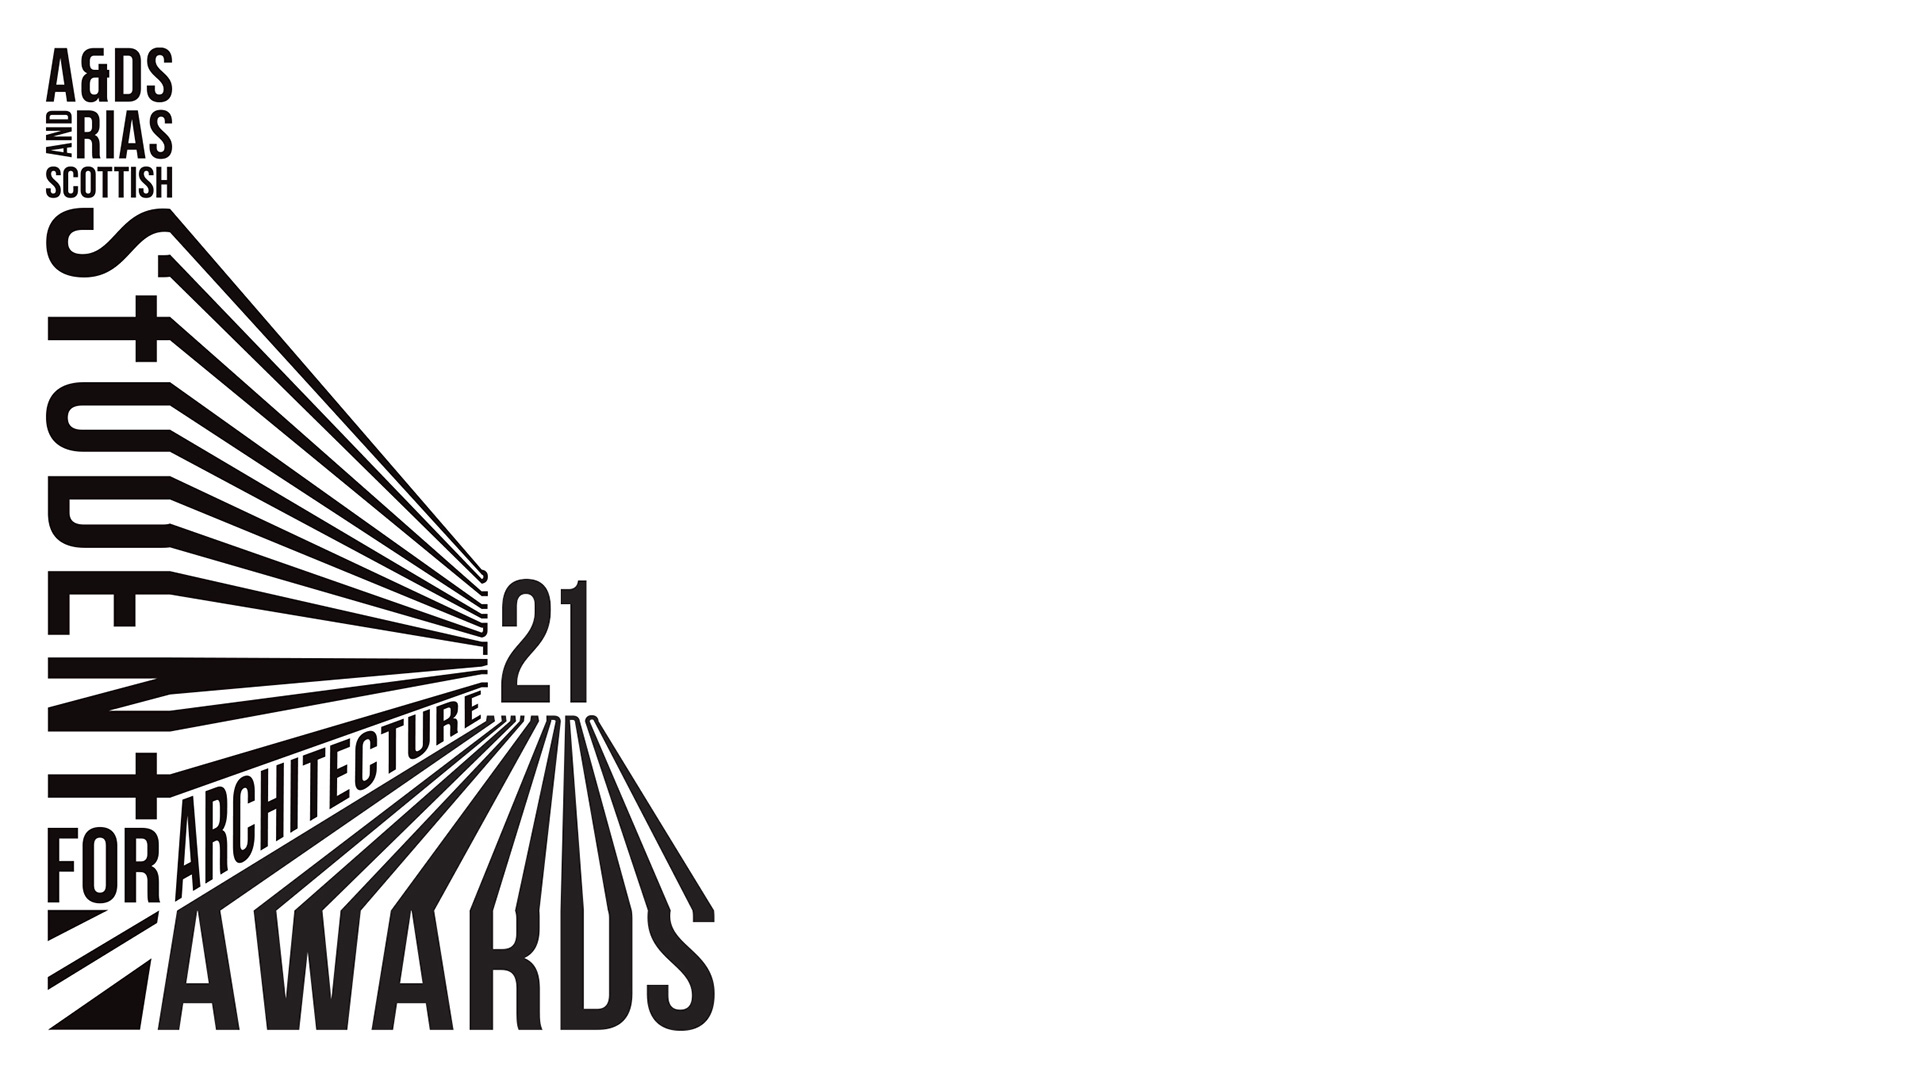 A black and white logo spelling out the words A&DS and RIAS Student awards for architecture 21.